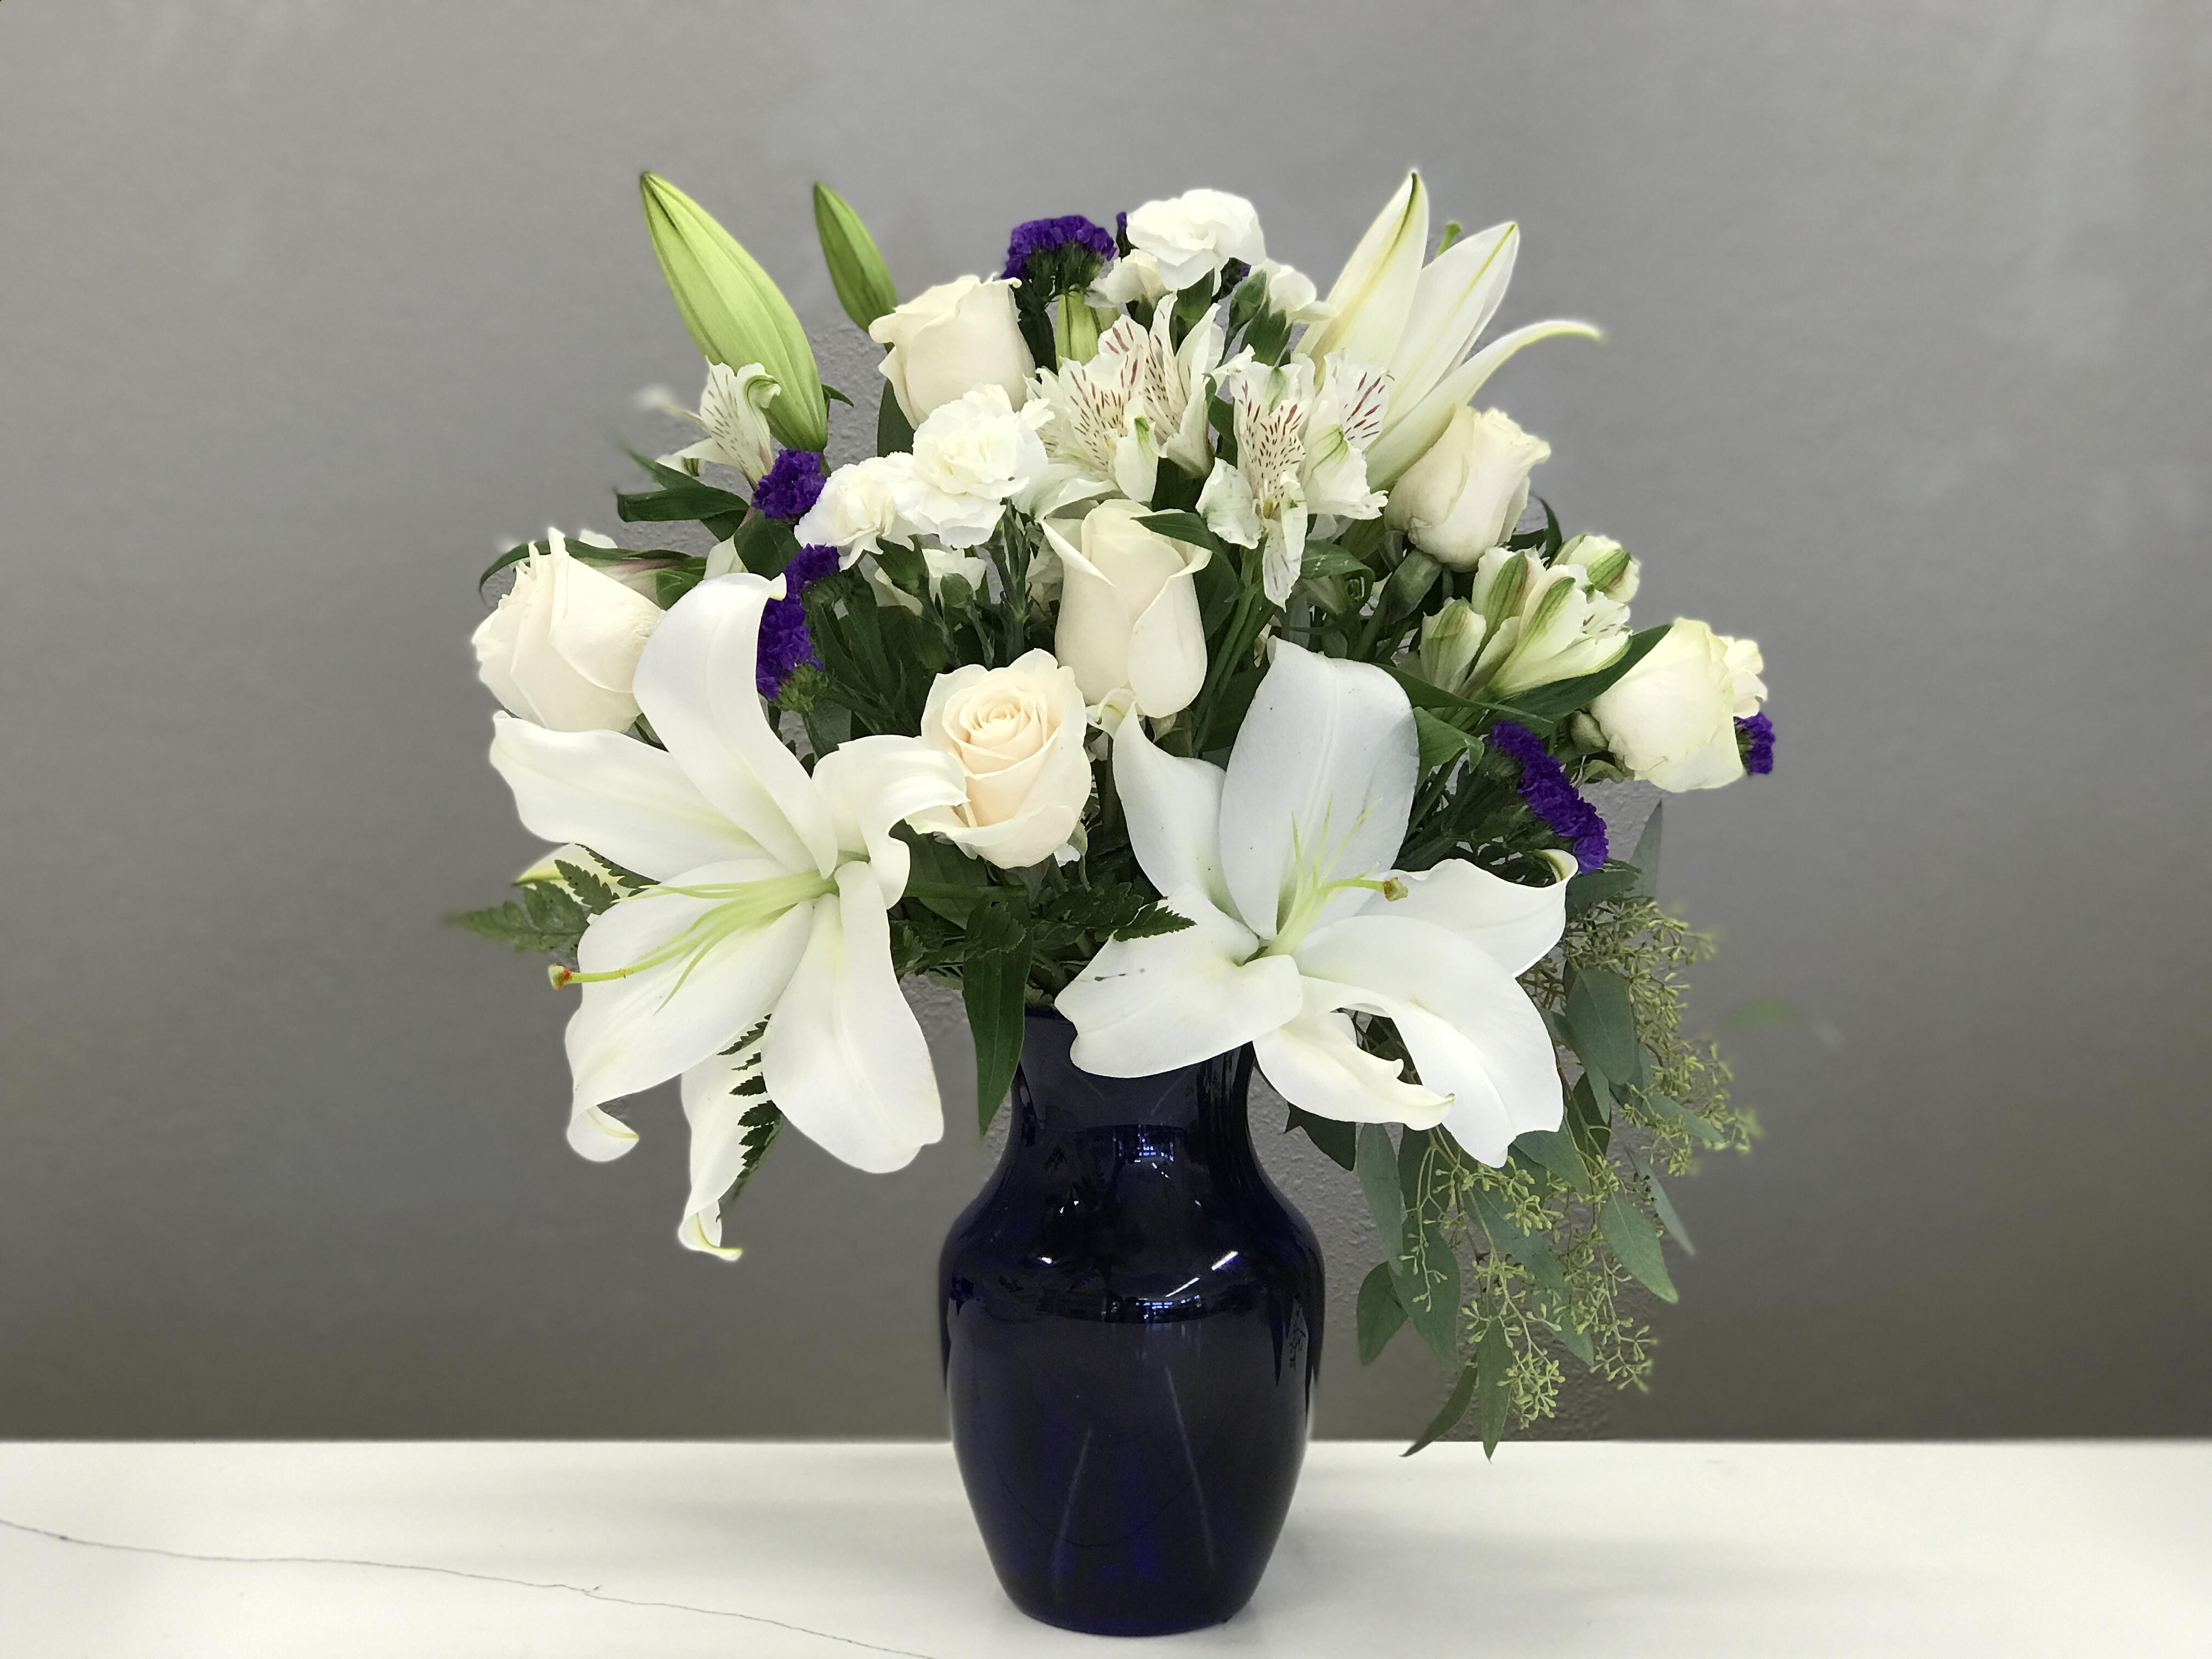 Cherished Always - Beautiful white lilies surrounded by cream roses and bursts of purple statice to remind friends and family they're on your heart. 